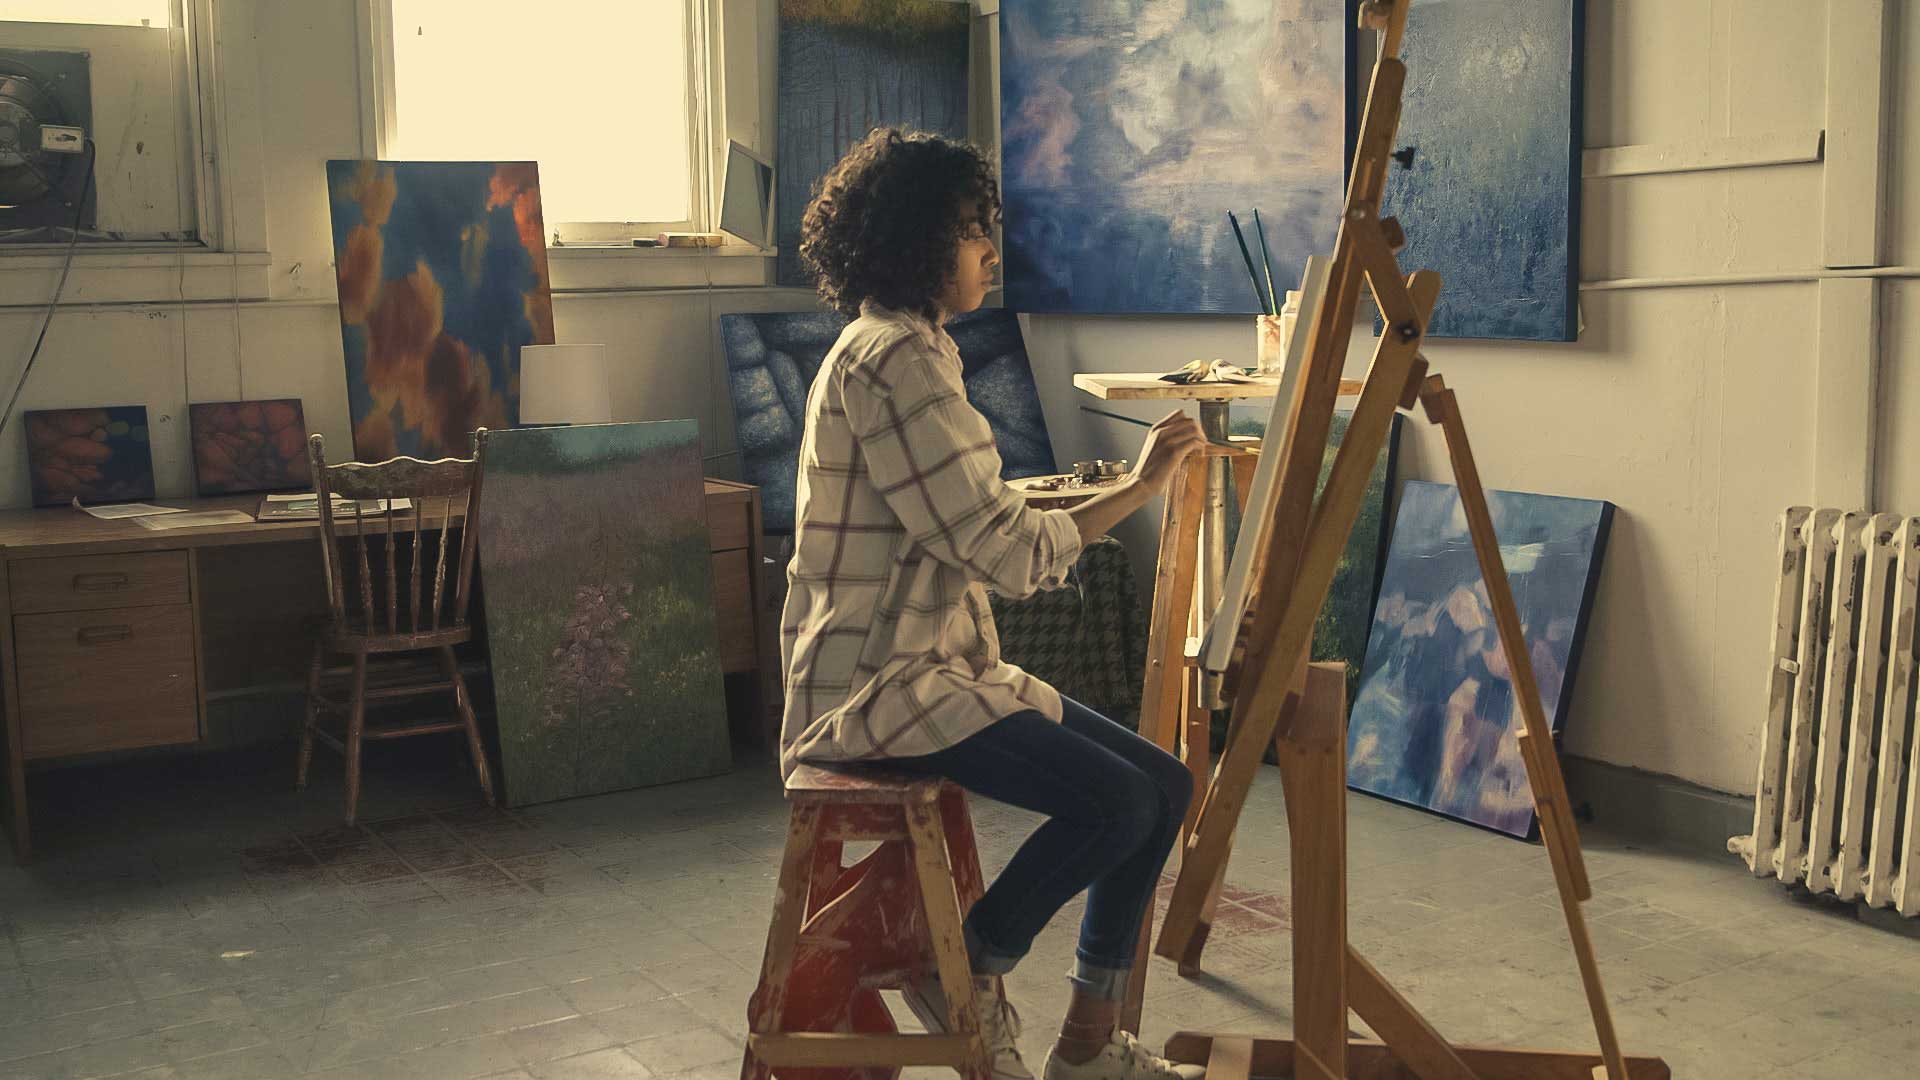 A painter as the example of creative people